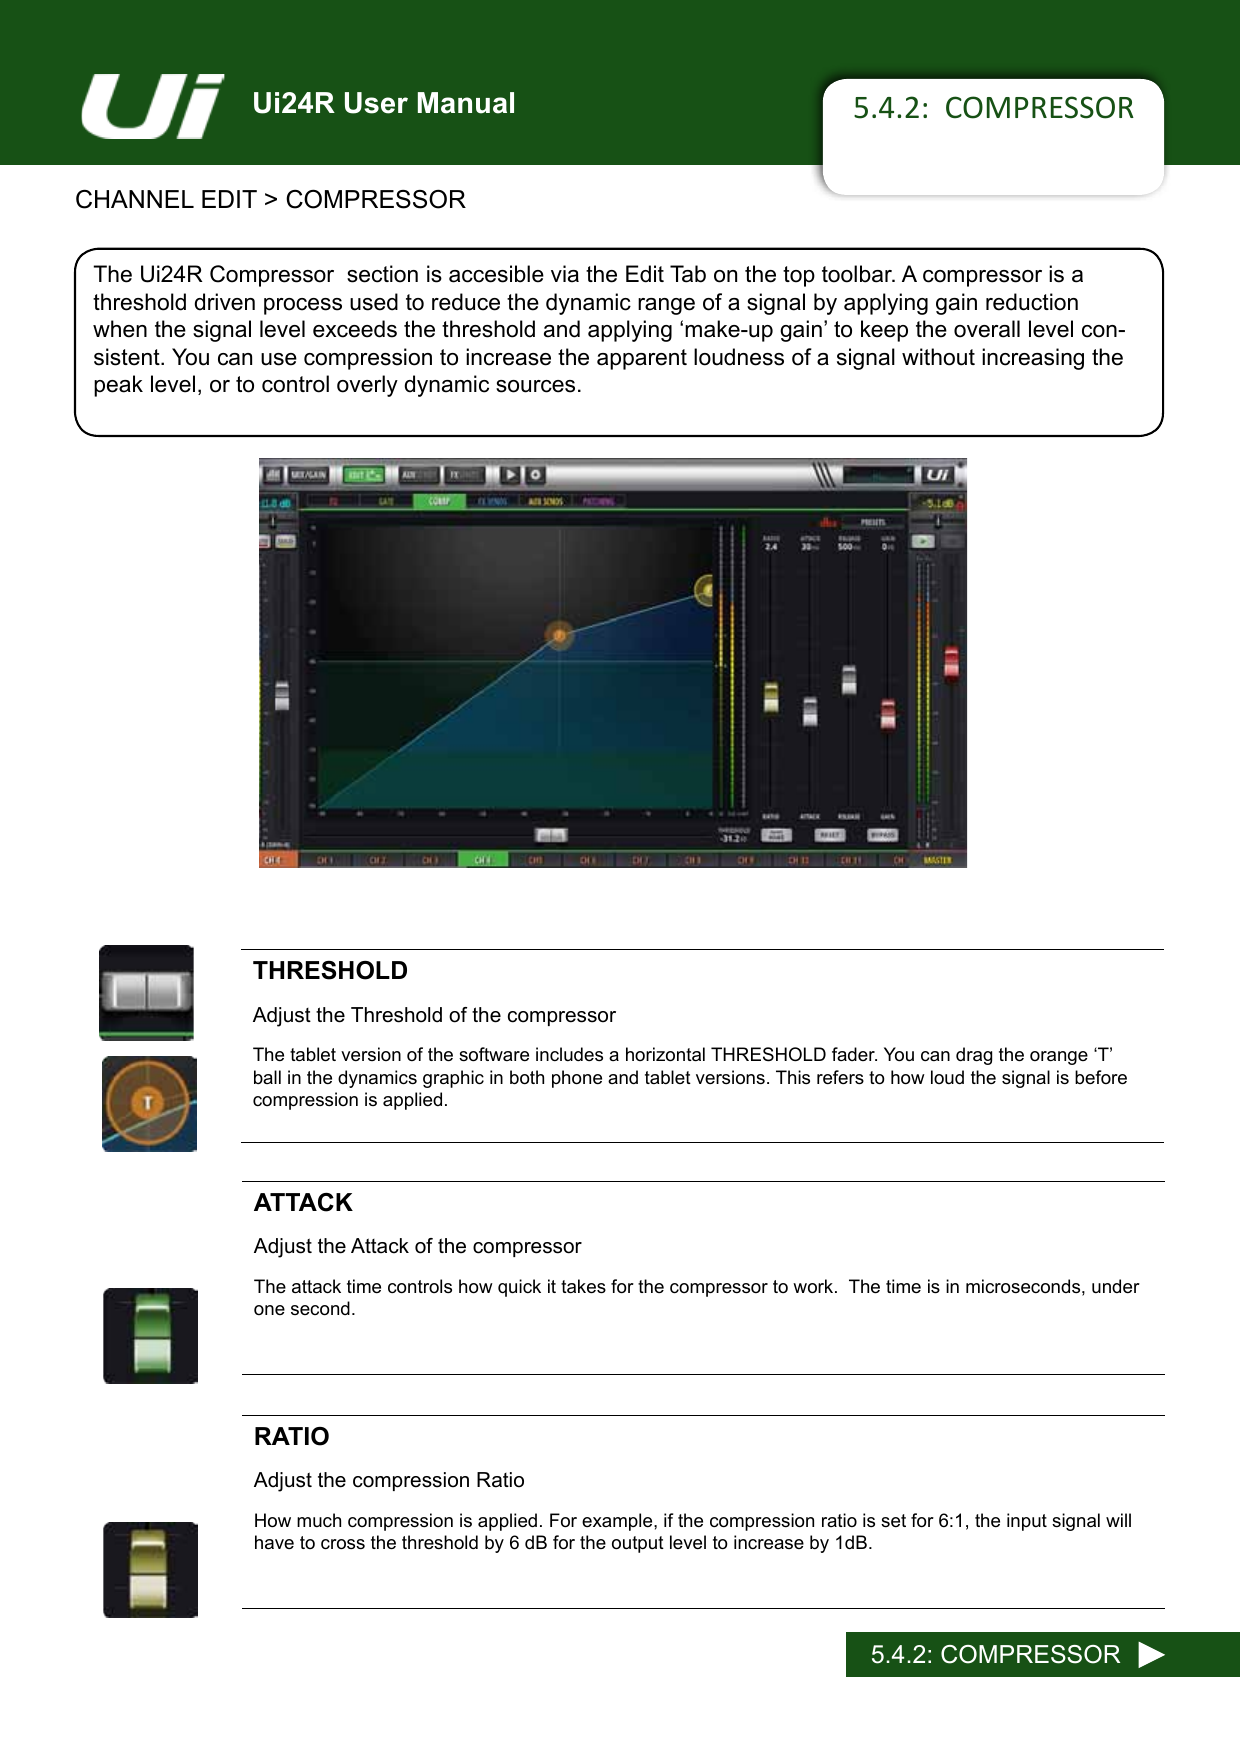 Ui24R User Manual 5.4.2:  COMPRESSORCHANNEL EDIT &gt; COMPRESSOR5.4.2: COMPRESSORThe Ui24R Compressor  section is accesible via the Edit Tab on the top toolbar. A compressor is a threshold driven process used to reduce the dynamic range of a signal by applying gain reduction whenthesignallevelexceedsthethresholdandapplying‘make-upgain’tokeeptheoveralllevelcon-sistent. You can use compression to increase the apparent loudness of a signal without increasing the peak level, or to control overly dynamic sources.THRESHOLDAdjust the Threshold of the compressorThetabletversionofthesoftwareincludesahorizontalTHRESHOLDfader.Youcandragtheorange‘T’ball in the dynamics graphic in both phone and tablet versions. This refers to how loud the signal is before compression is applied.ATTACKAdjust the Attack of the compressorThe attack time controls how quick it takes for the compressor to work.  The time is in microseconds, under one second.  RATIOAdjust the compression RatioHow much compression is applied. For example, if the compression ratio is set for 6:1, the input signal will have to cross the threshold by 6 dB for the output level to increase by 1dB.Compressor Screen Grab